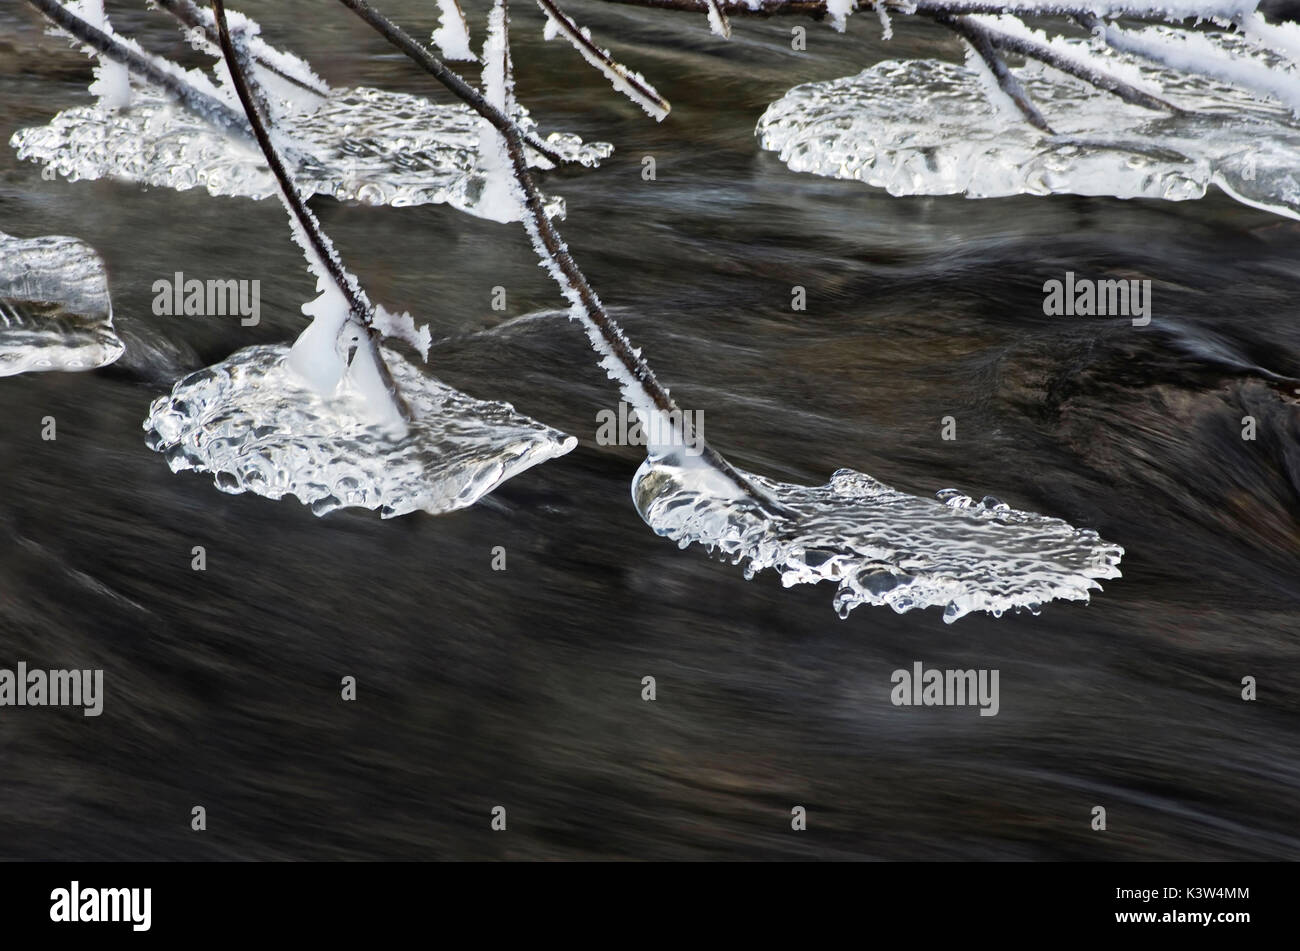 Europe, Italy, Lombardy, Brescia district, Vezza d'Oglio village. Iced branches on flowing water. Stock Photo